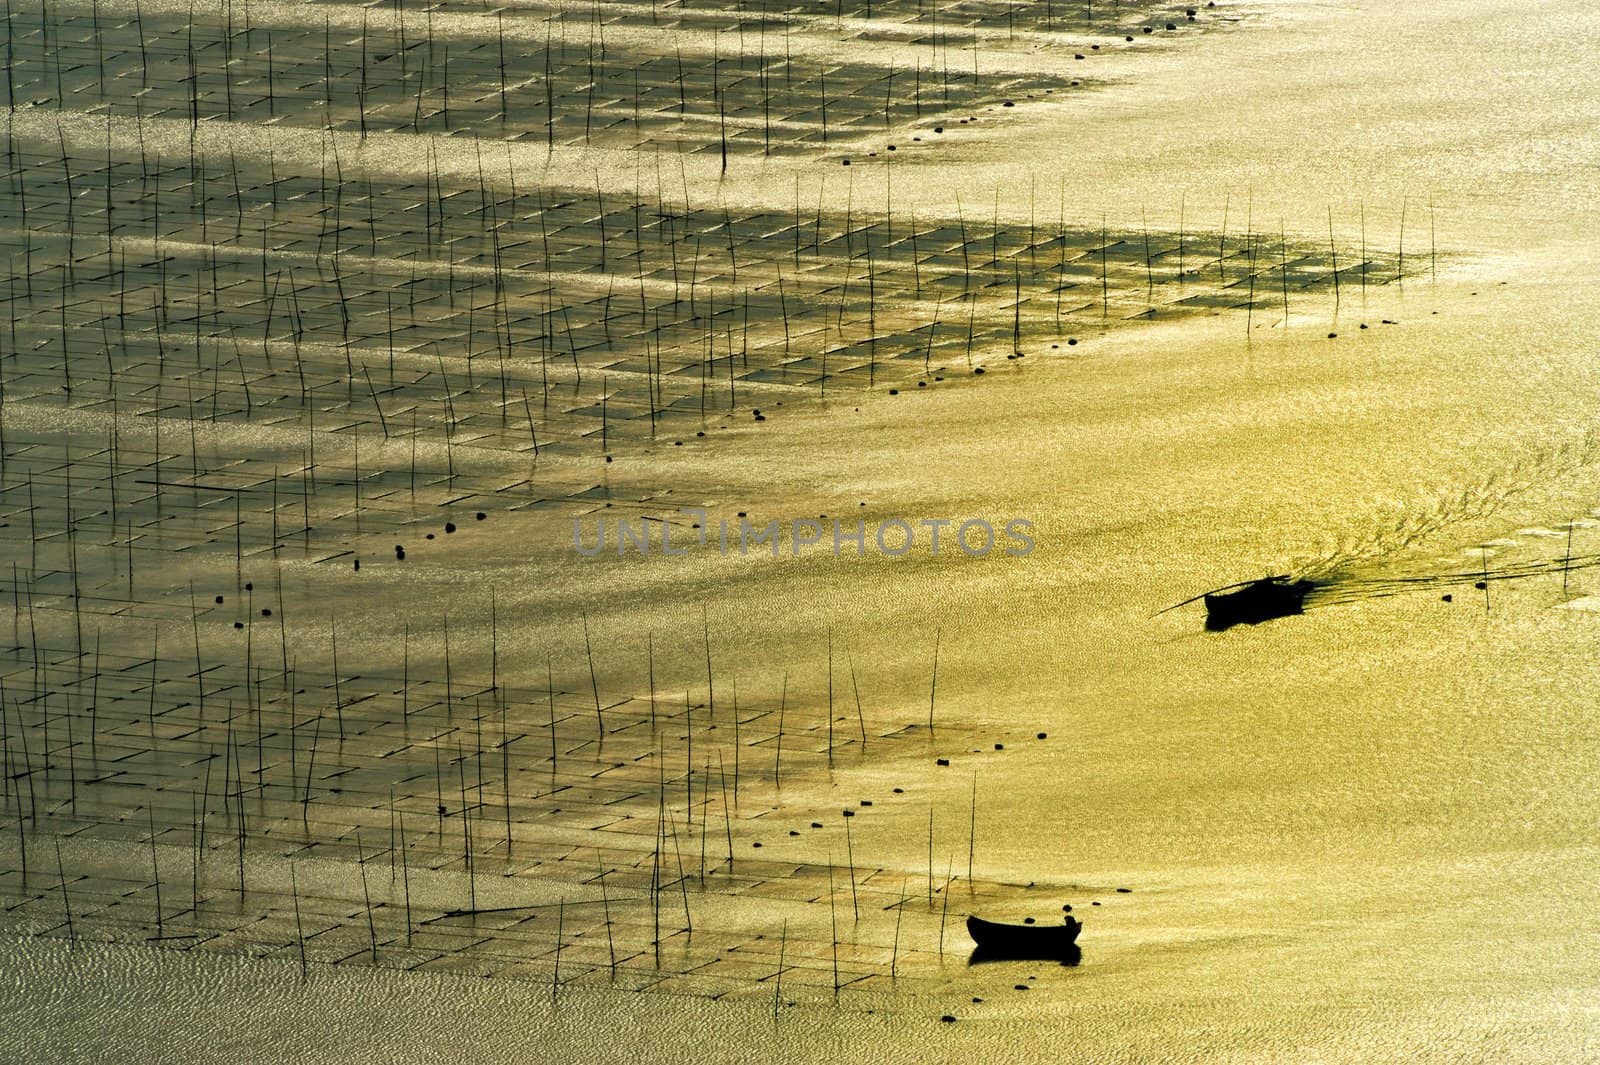 Seaweed farm against strong sunlight, photo taken in Fujian province of China